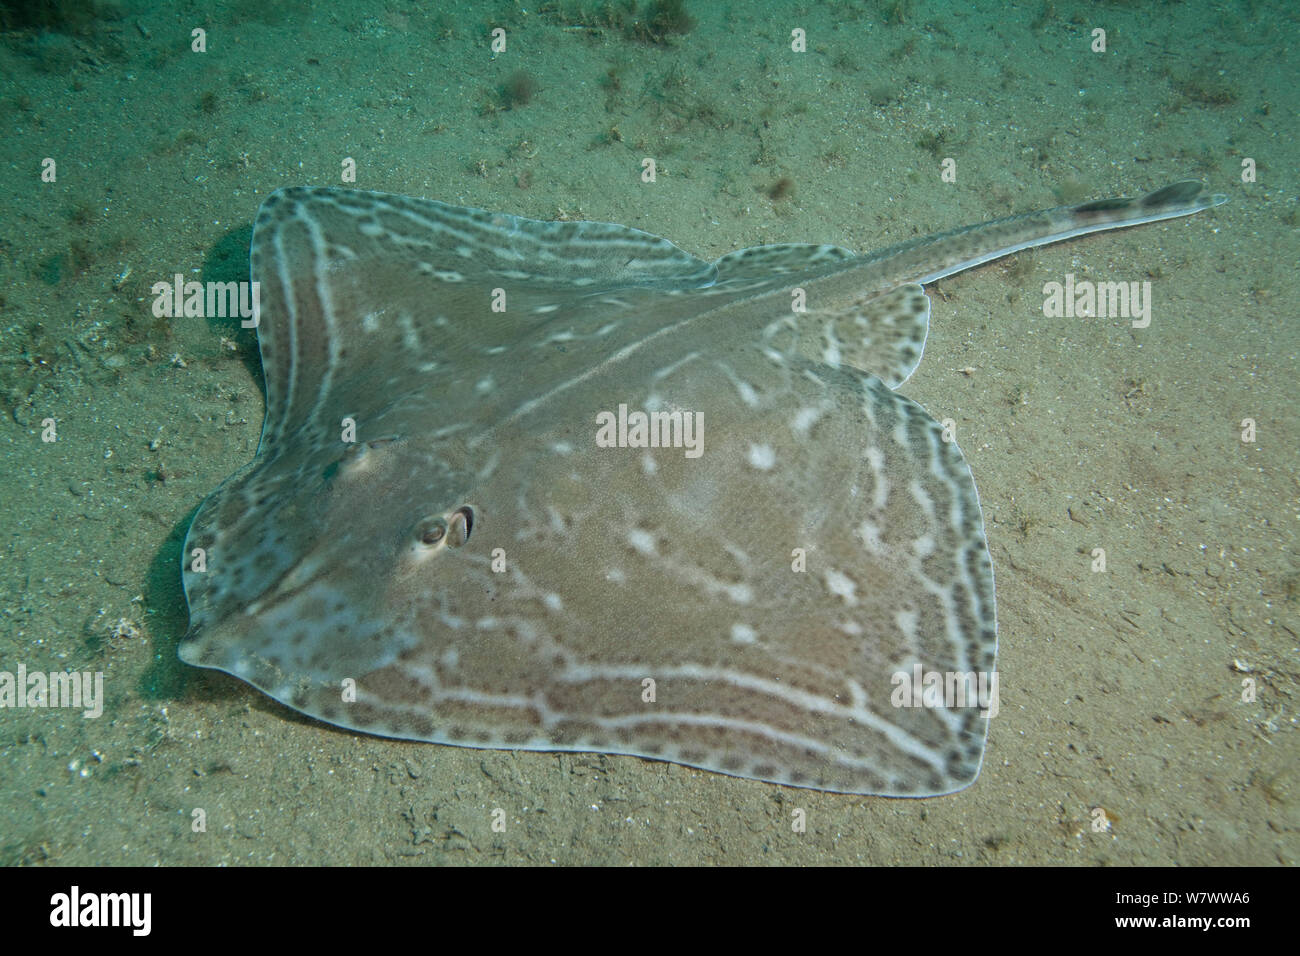 Small-eyed Ray (Raja microocellata) on sea floor, Bouley Bay, Jersey, British Channel Islands. Stock Photo